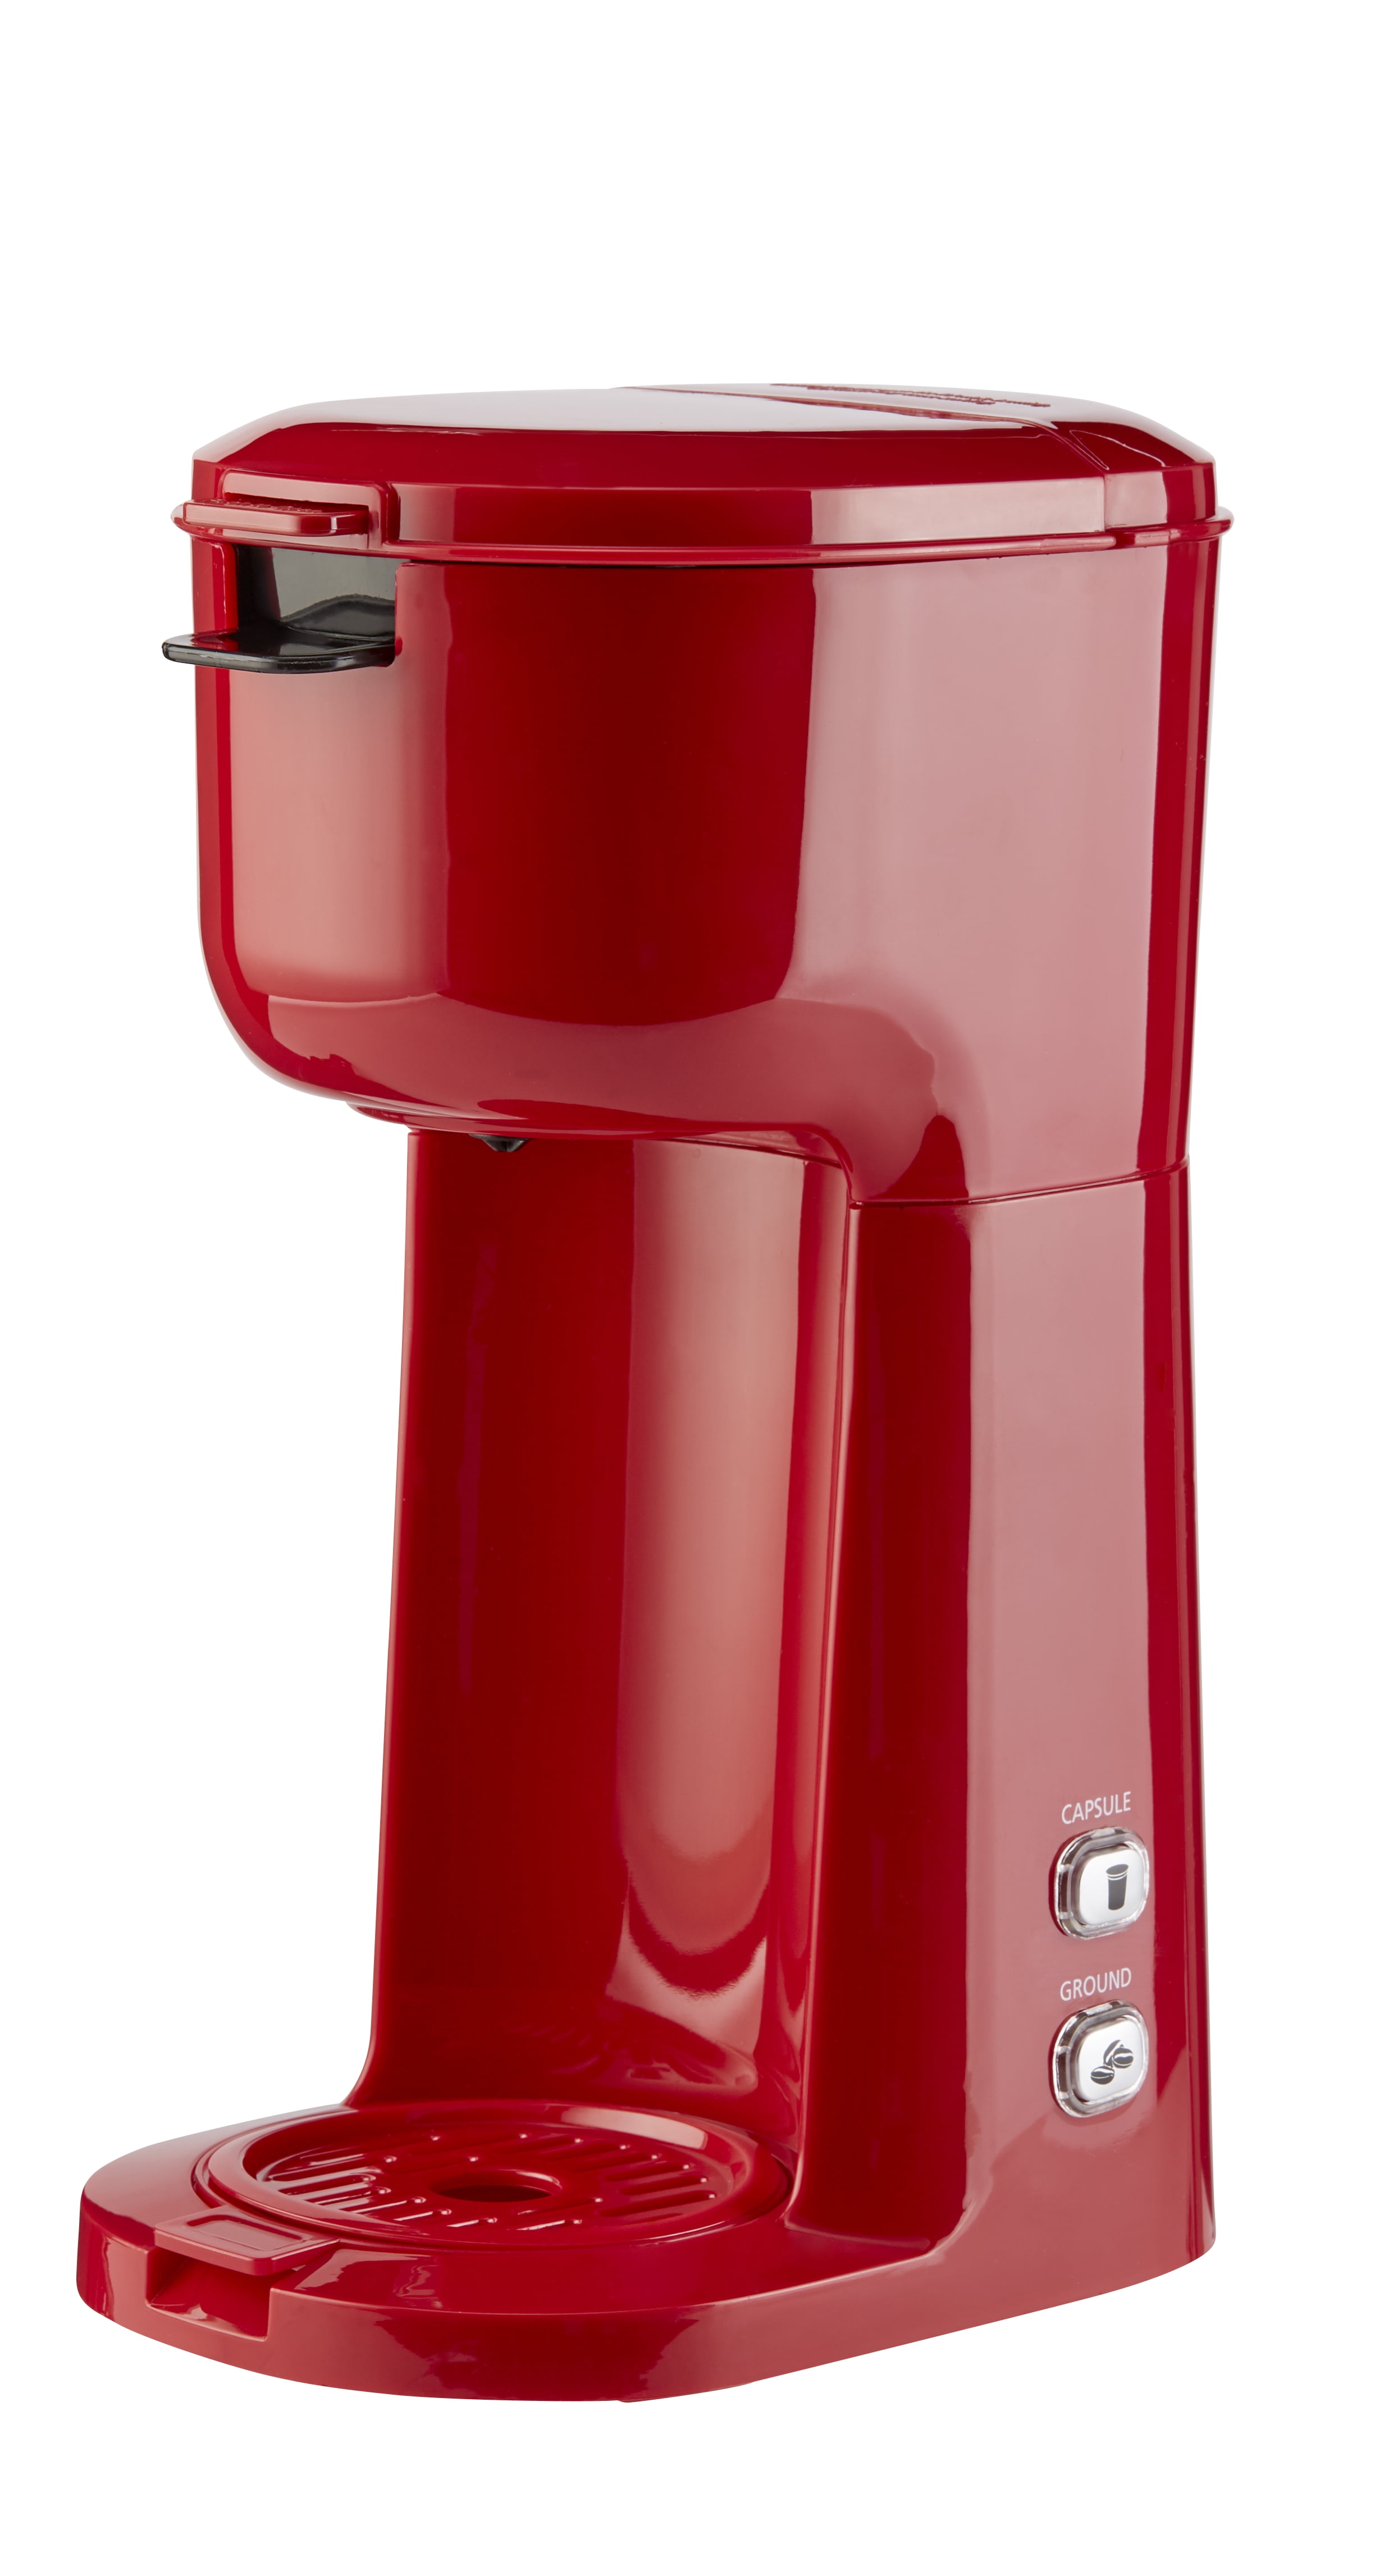 Mr. Coffee Red Single Serve Coffee Maker - Shop Coffee Makers at H-E-B